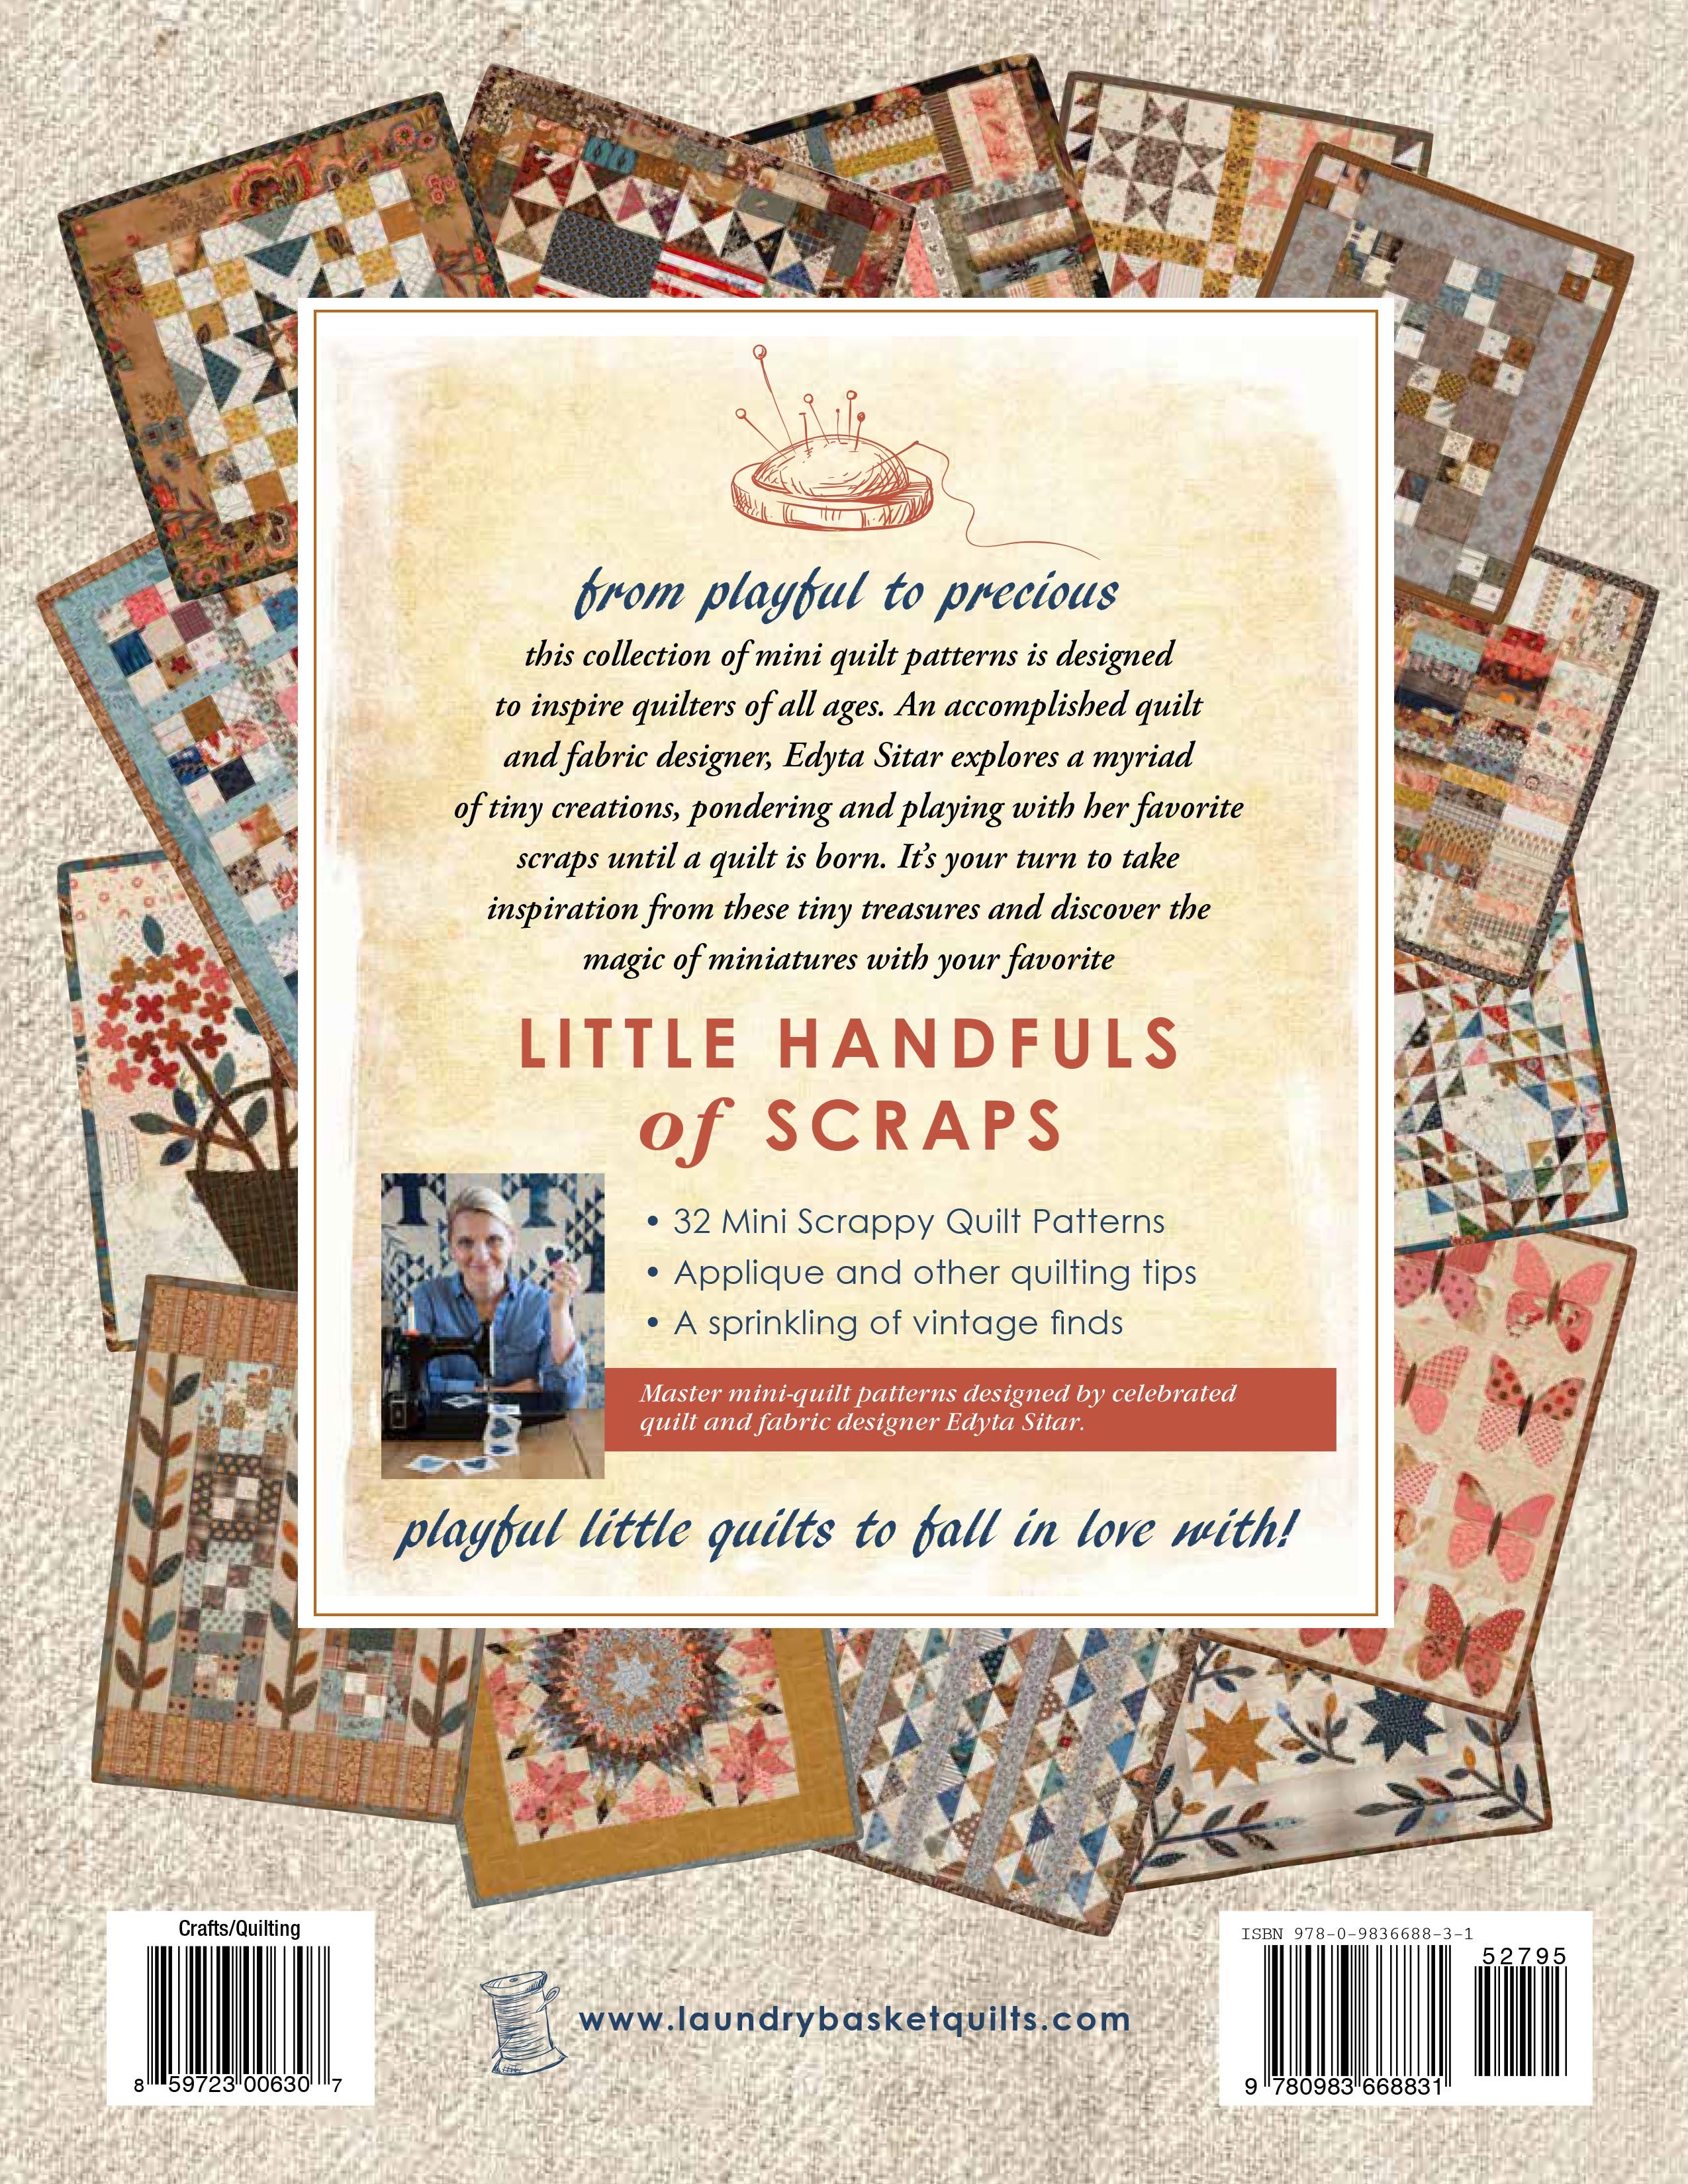 Little Handfuls Of Scraps Quilt Book by Edyta Sitar of Laundry Basket Quilts